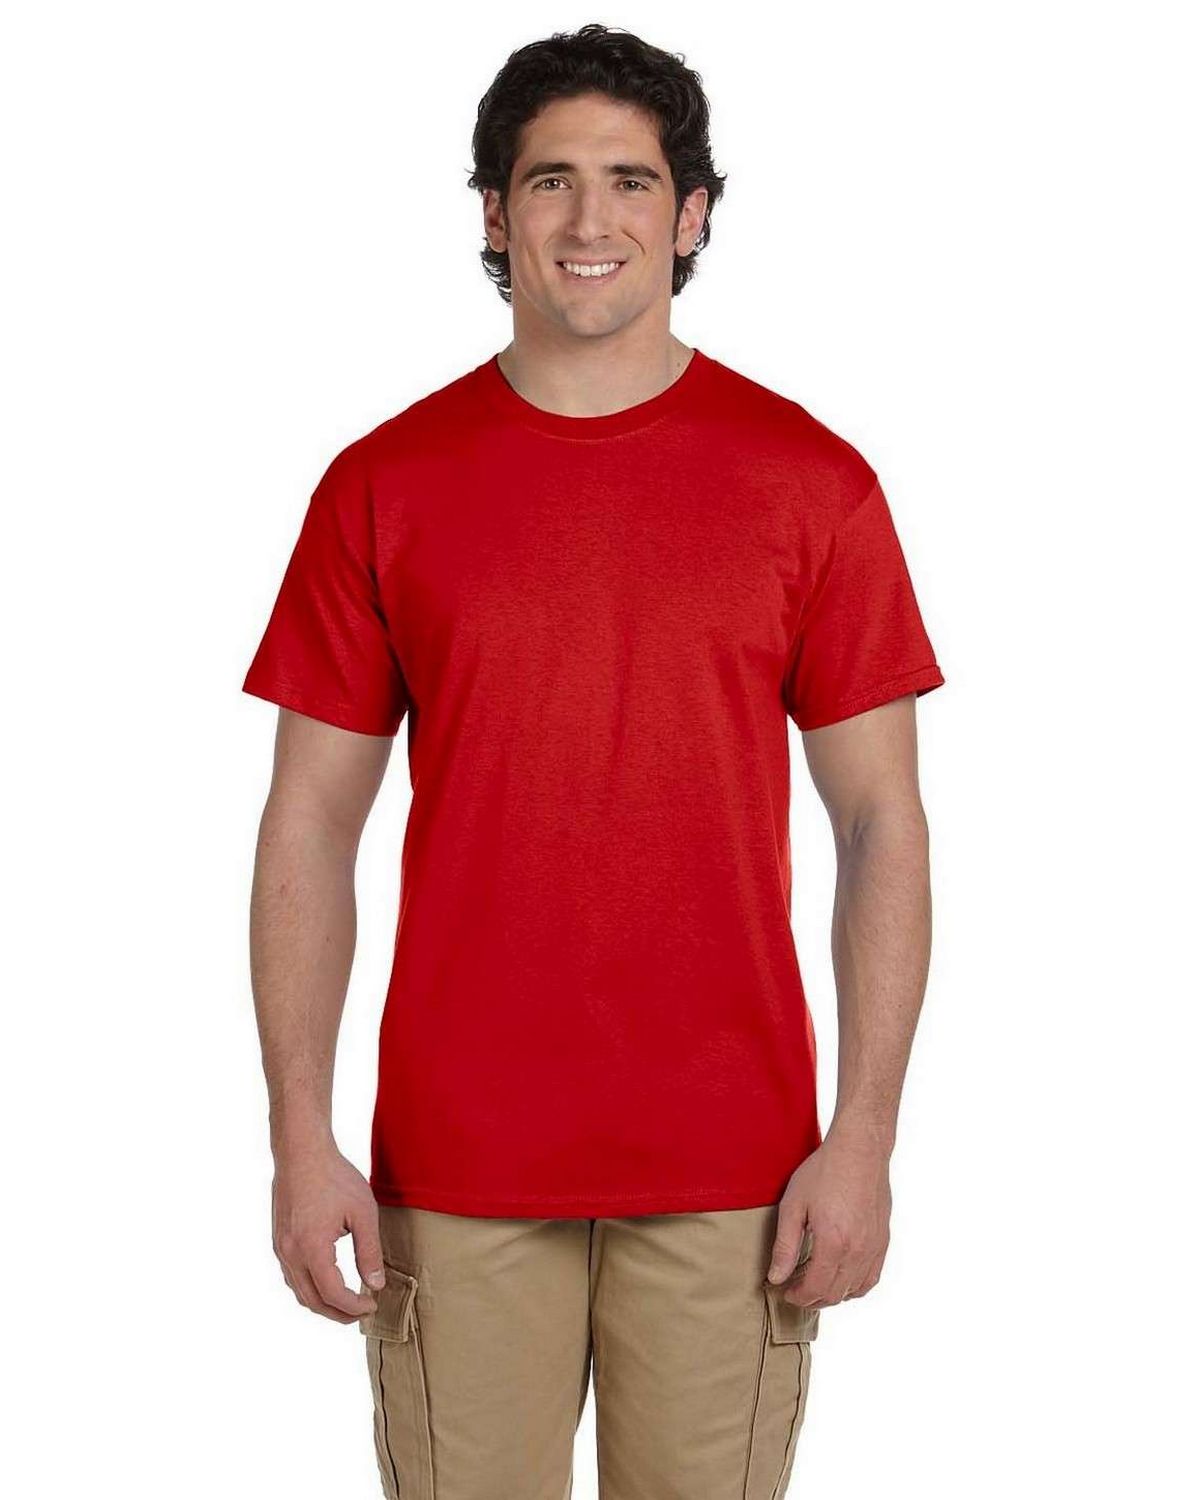 Fruit of the Loom 3931 Cotton T-Shirt